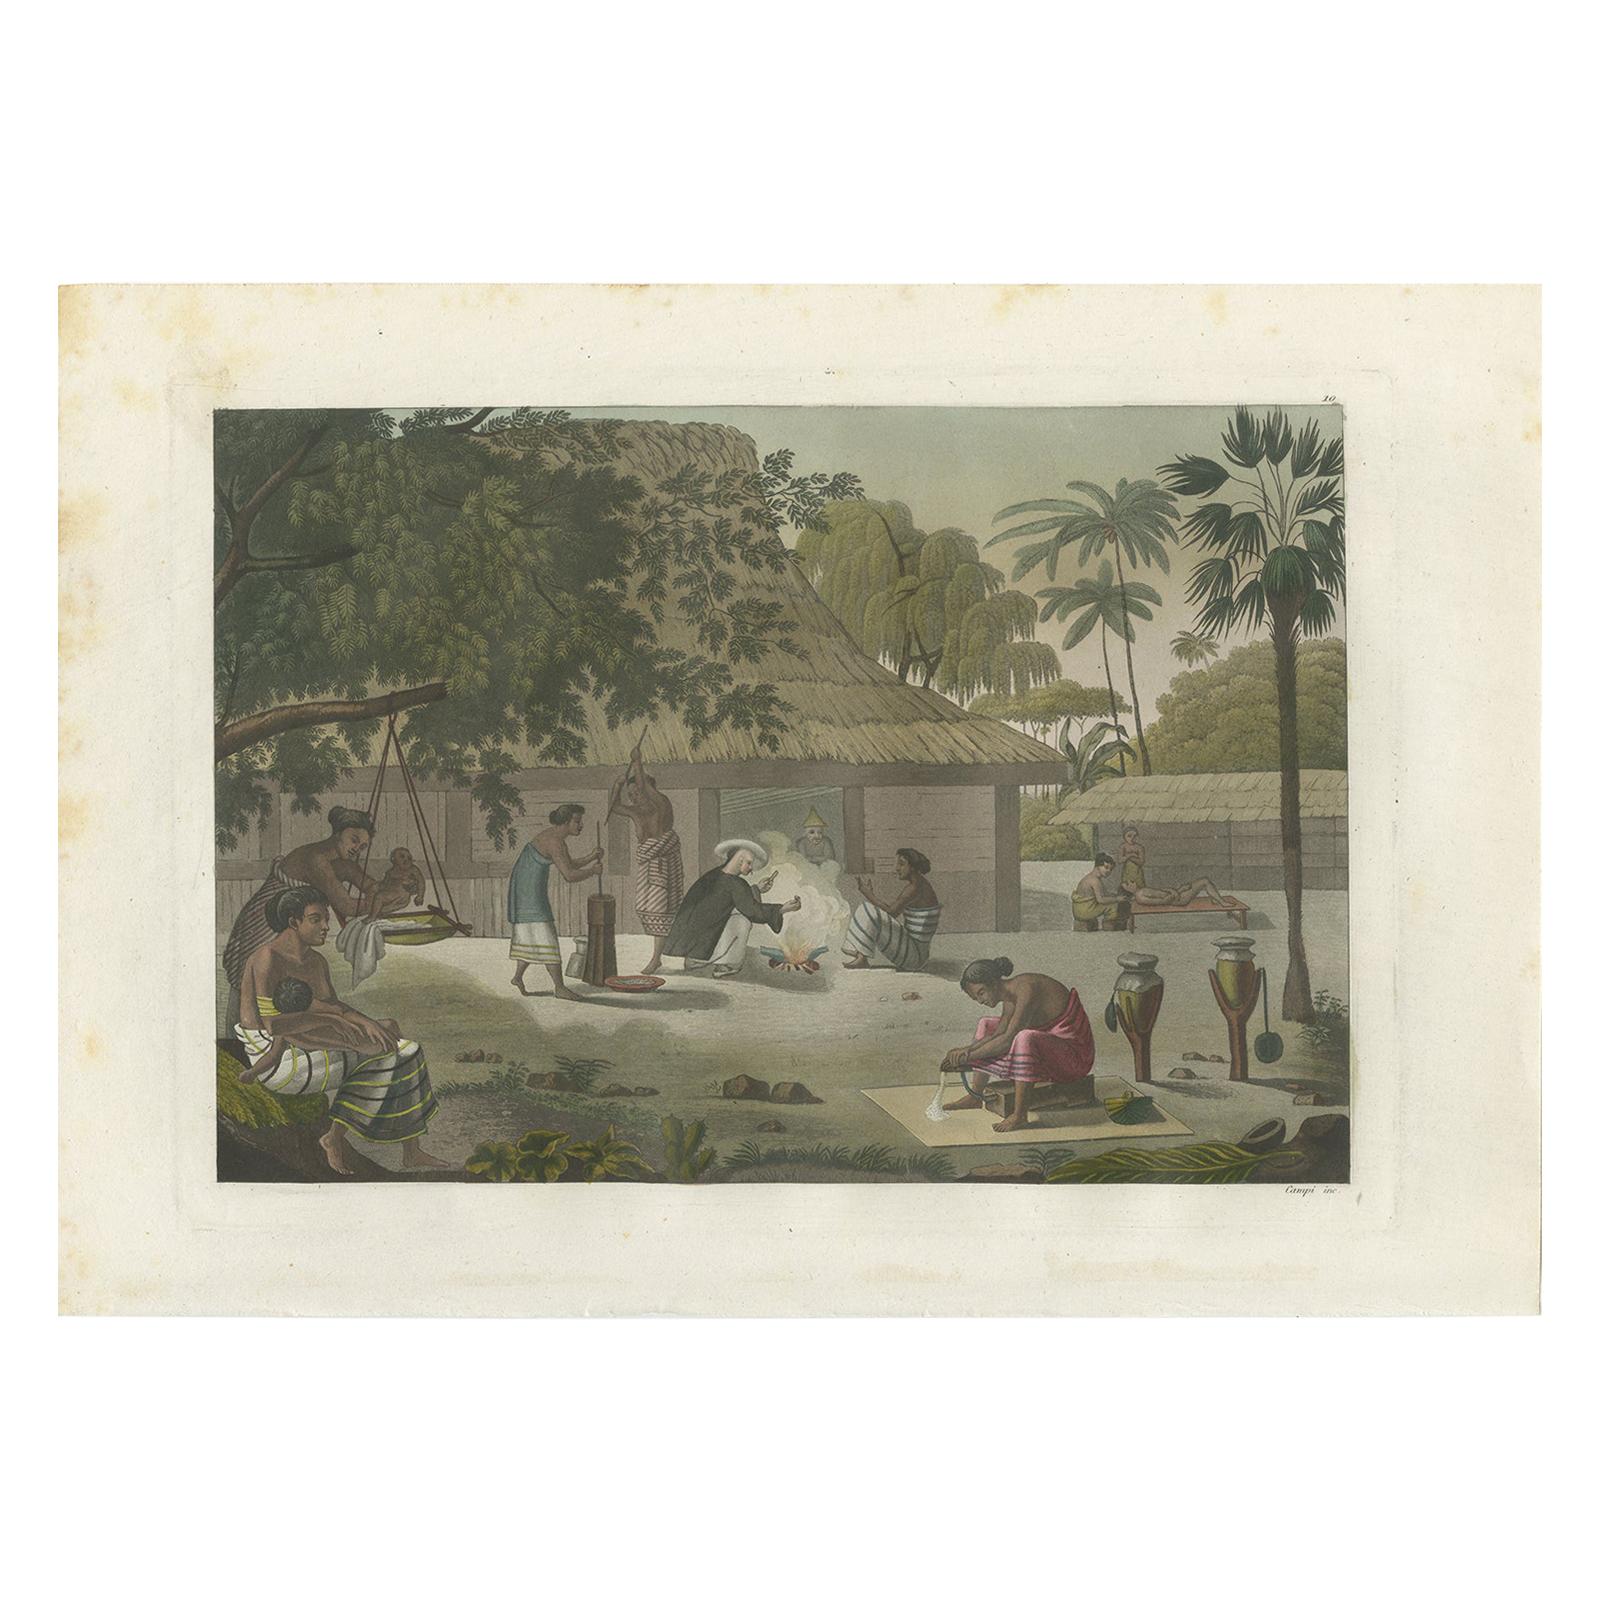 Antique Print of a Domestic Scene in Kupang by Ferrario '1831' For Sale